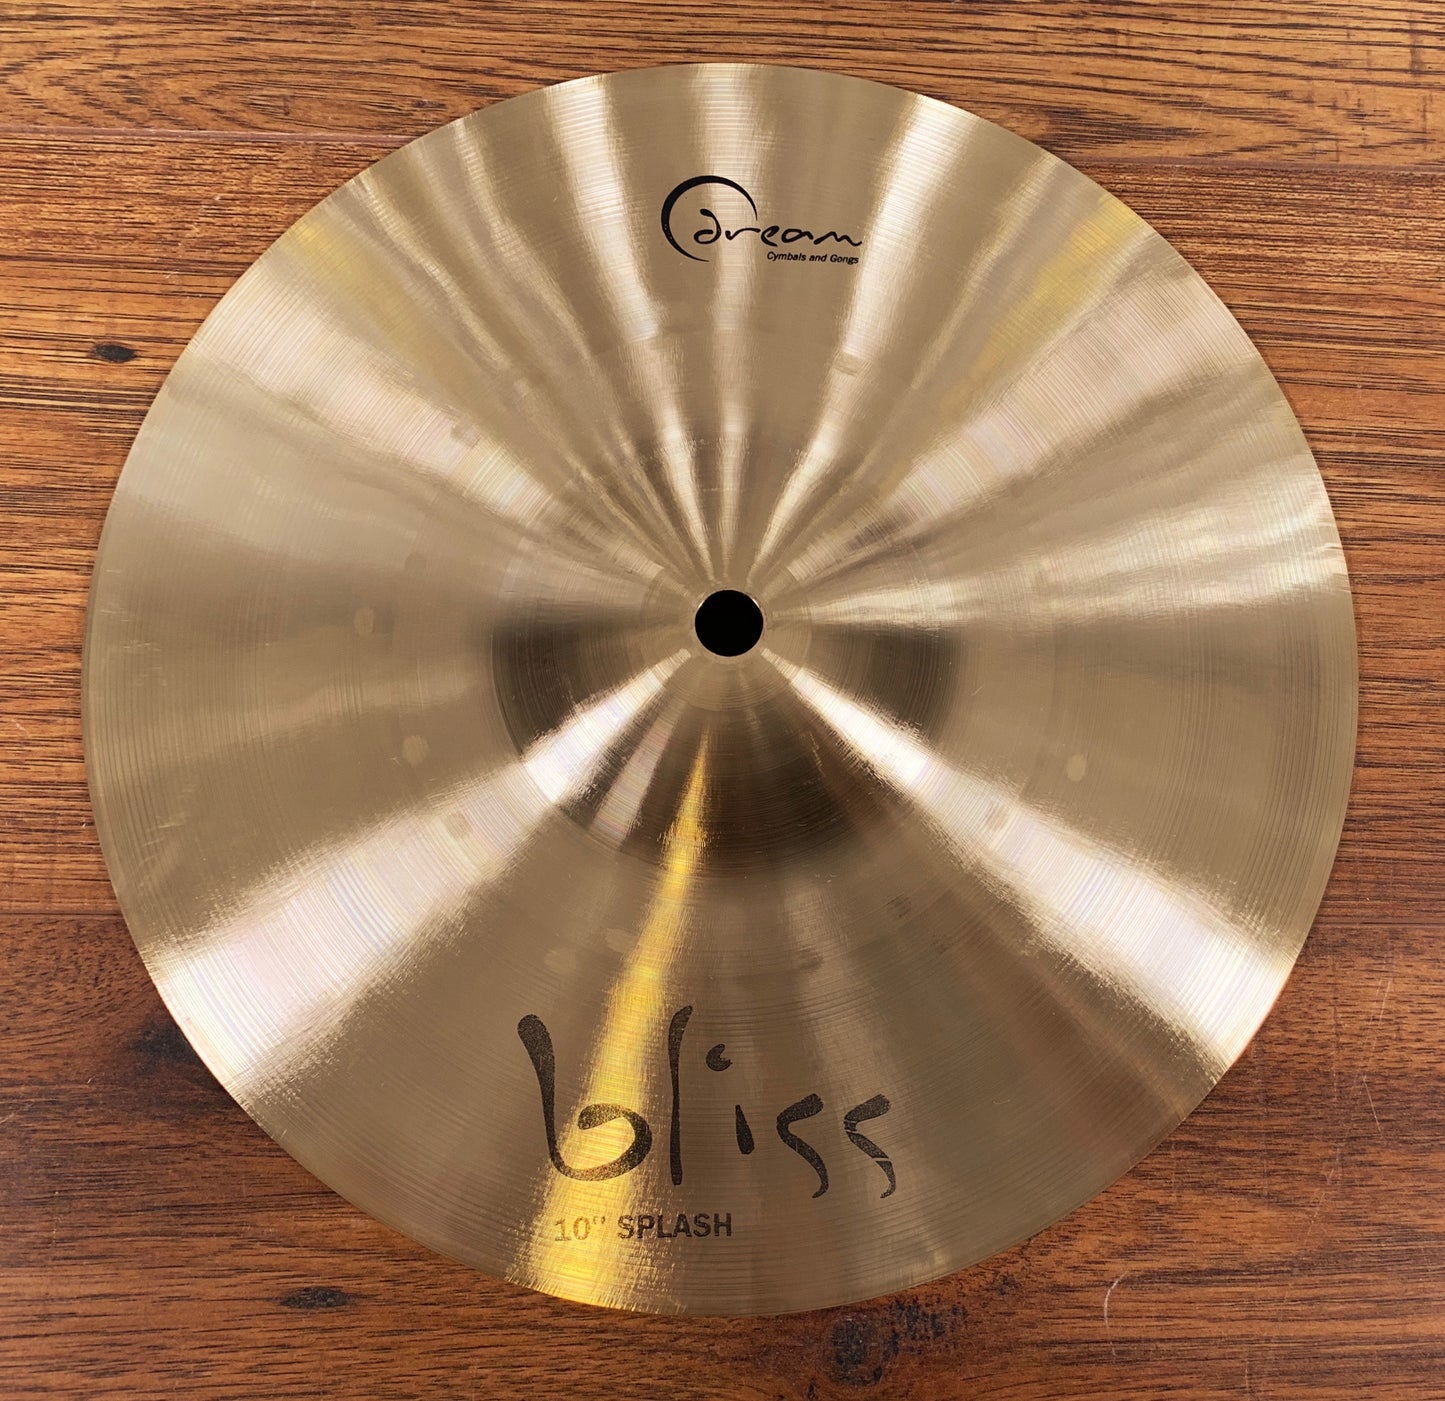 Dream Cymbals BSP10 Bliss Hand Forged & Hammered 10" Splash Cymbal Demo